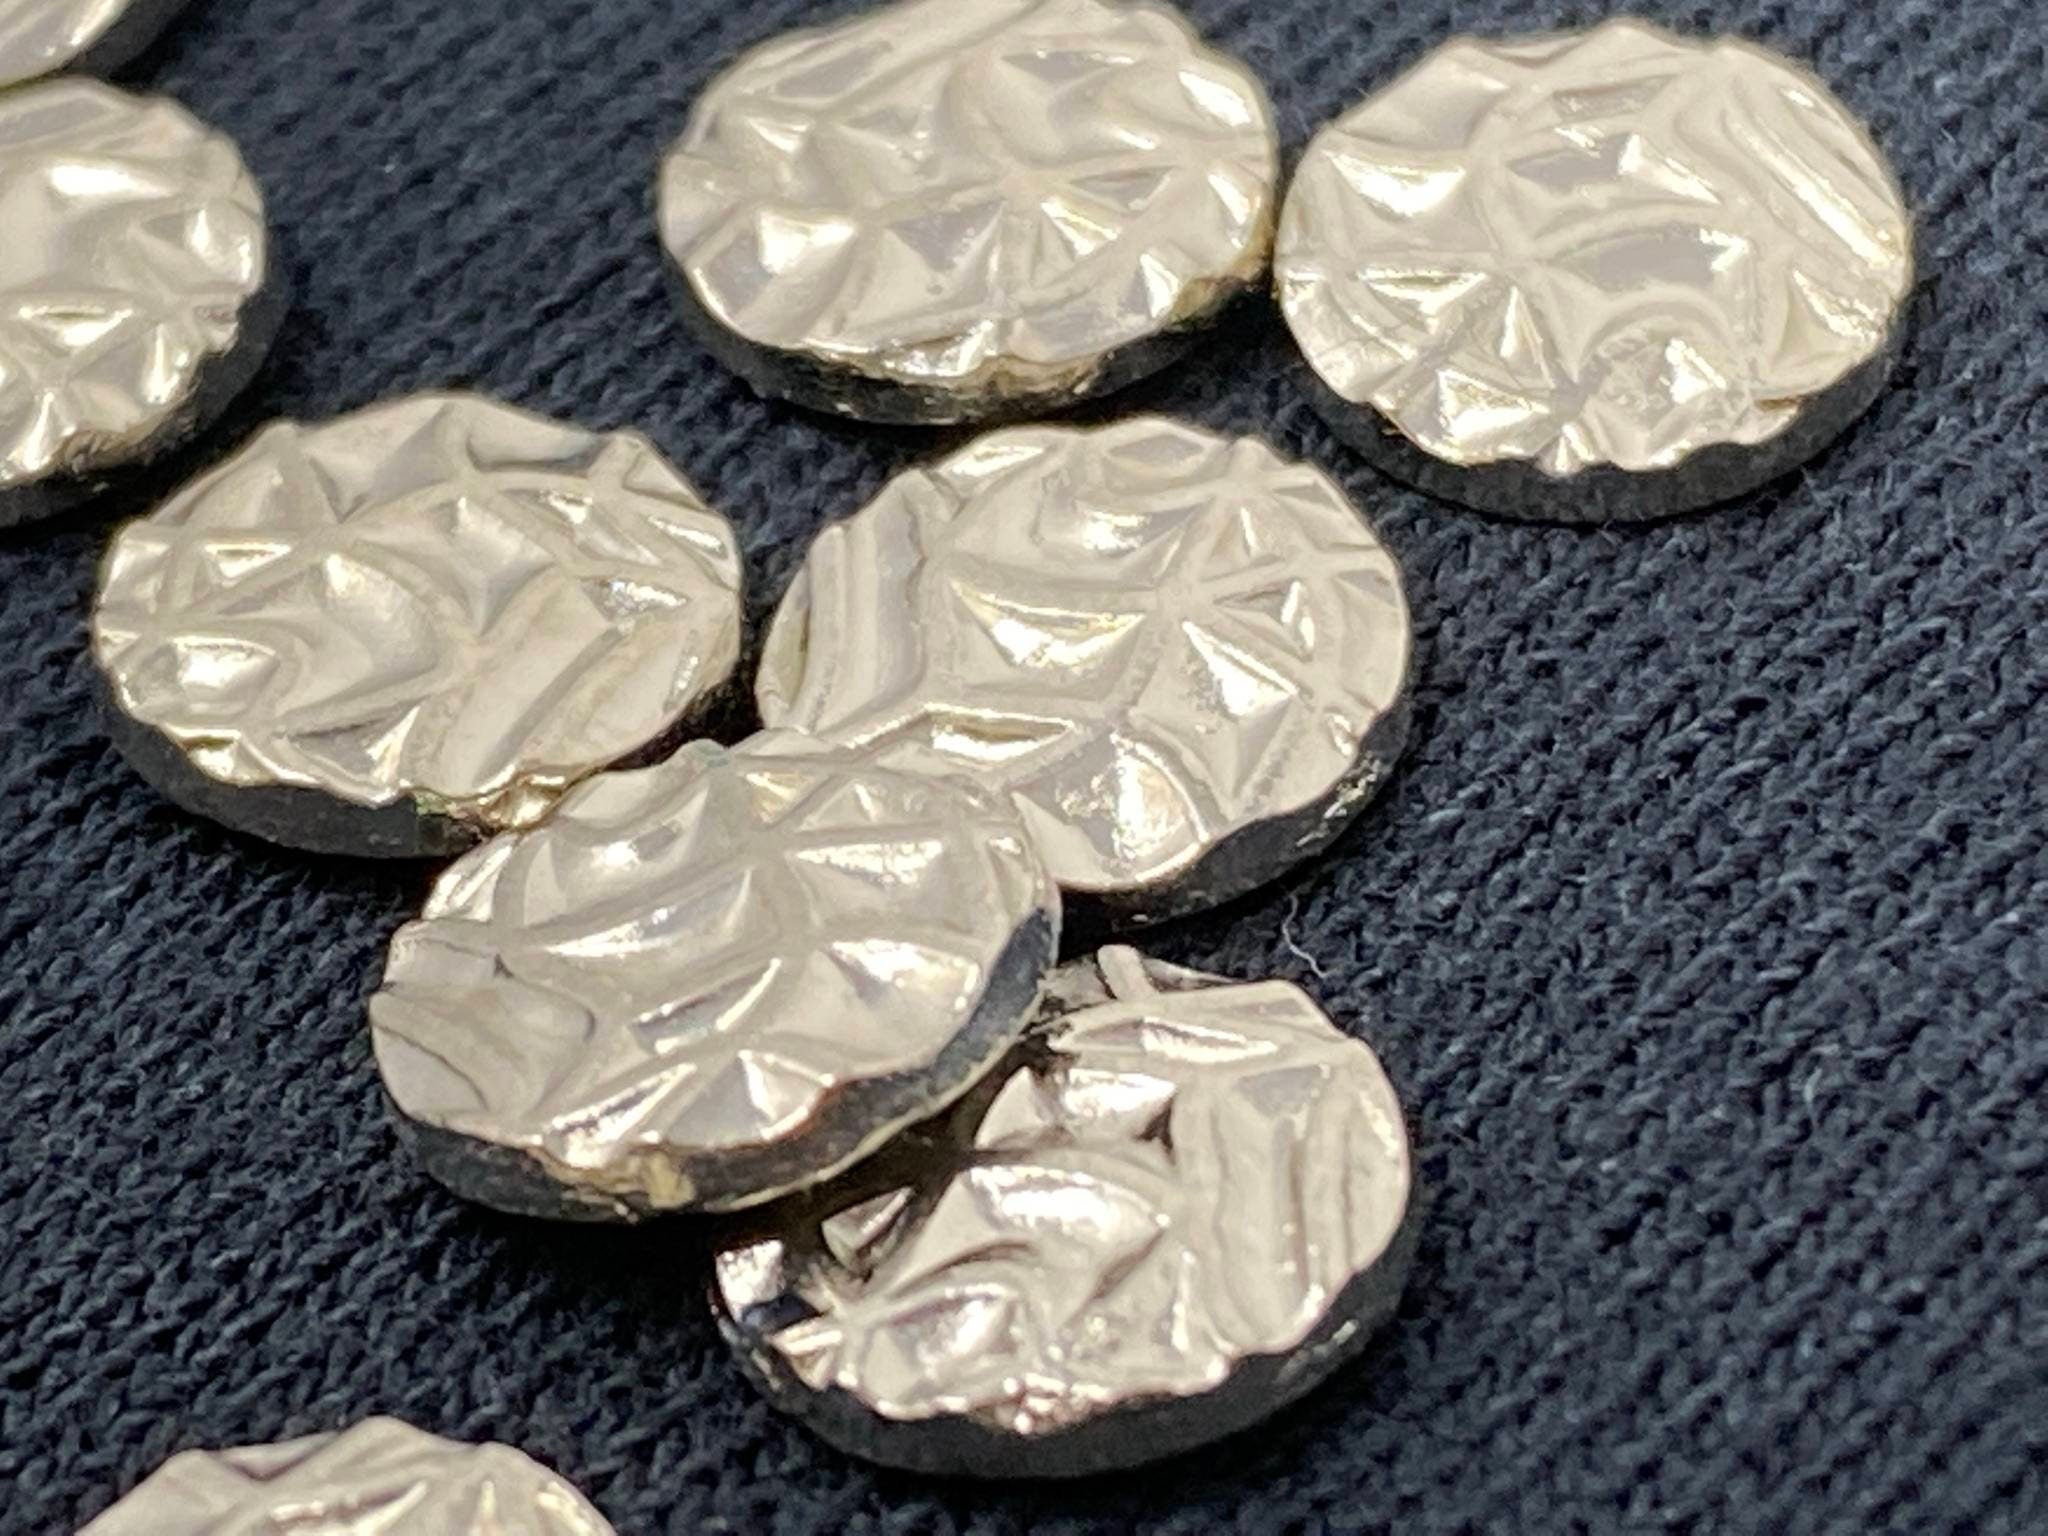 New, "Ripple Wave" SILVER Hotfix Studs, 100 Pcs, 10mm, DIY Crafts, Great for Denim, Sweaters, Jackets, Belts, Bags, Shoes, Crafts,+ MORE!